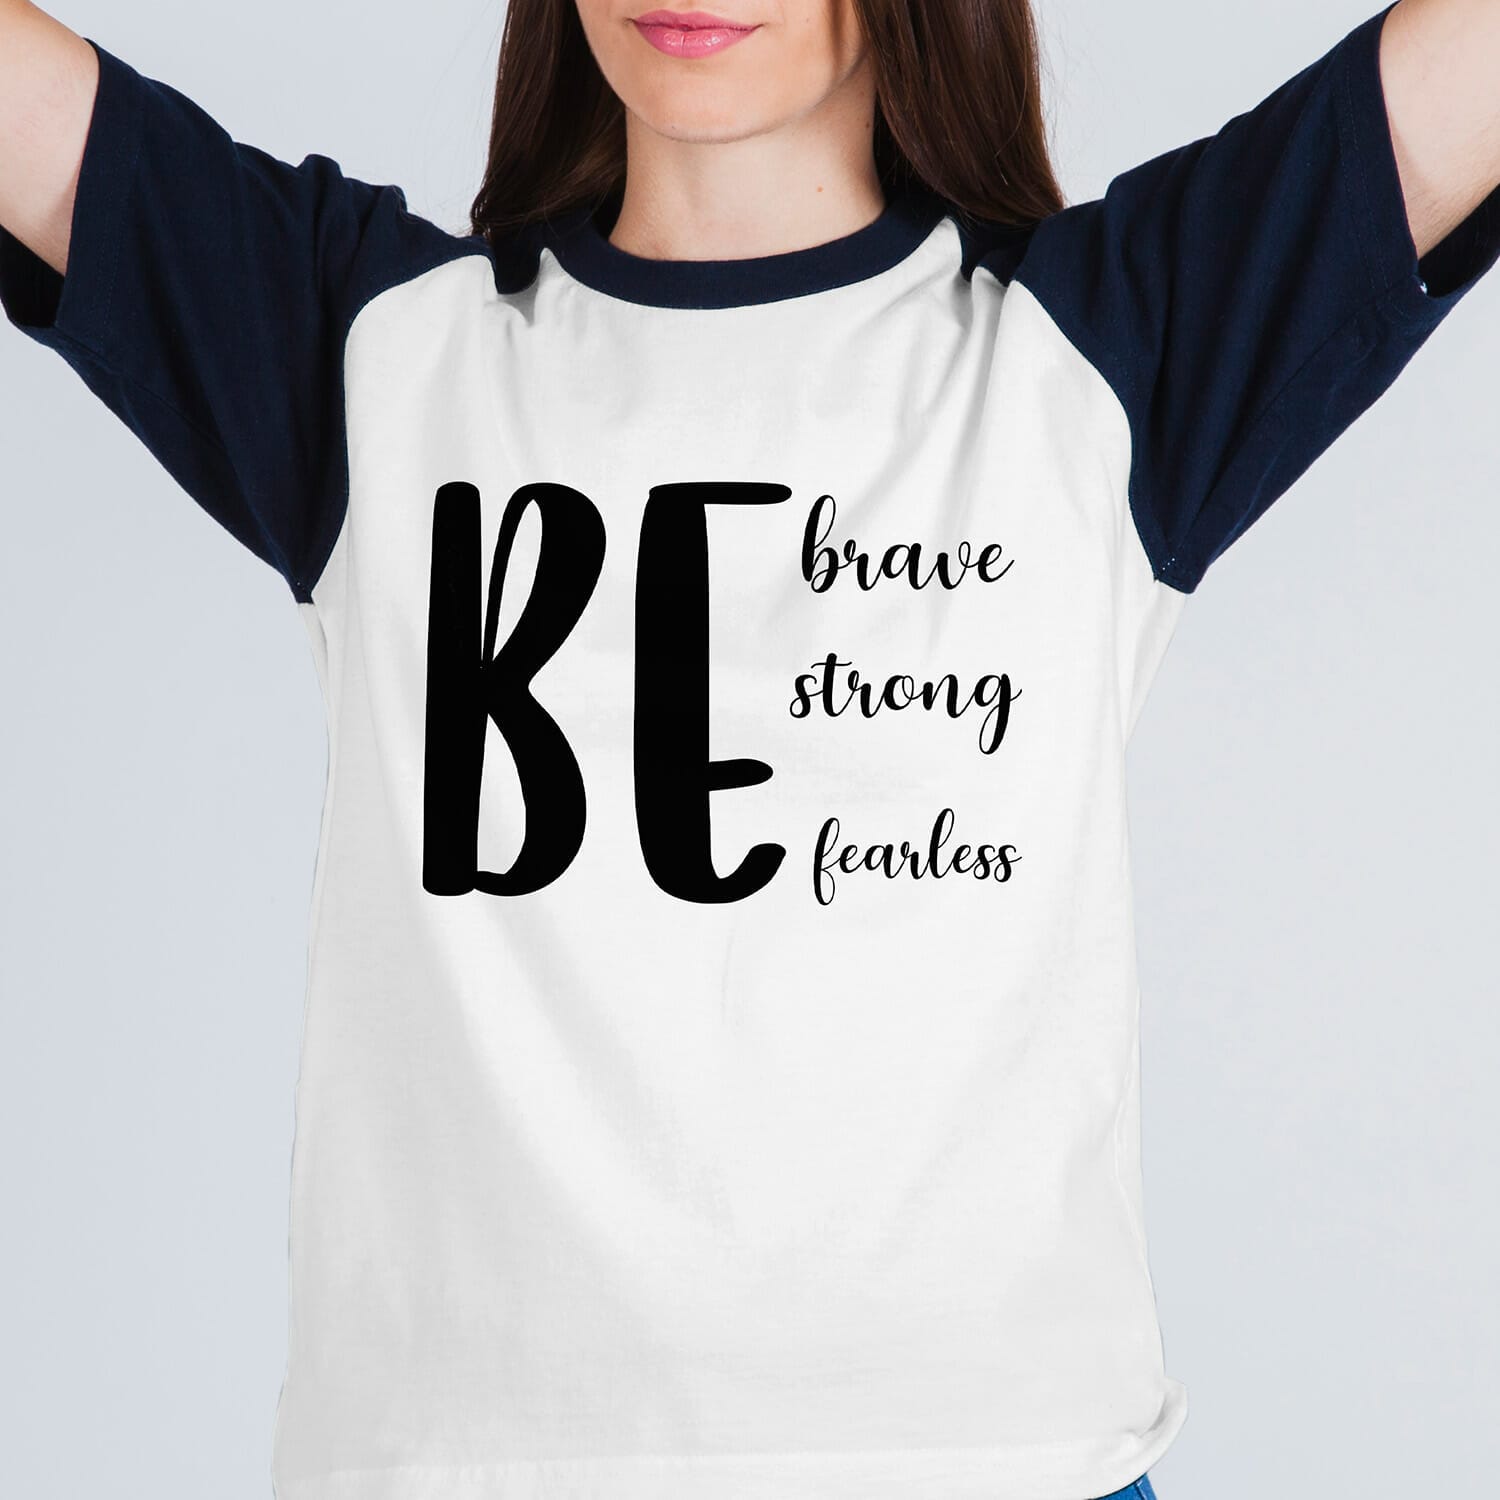 Be Brave Strong Fearless T shirt Design